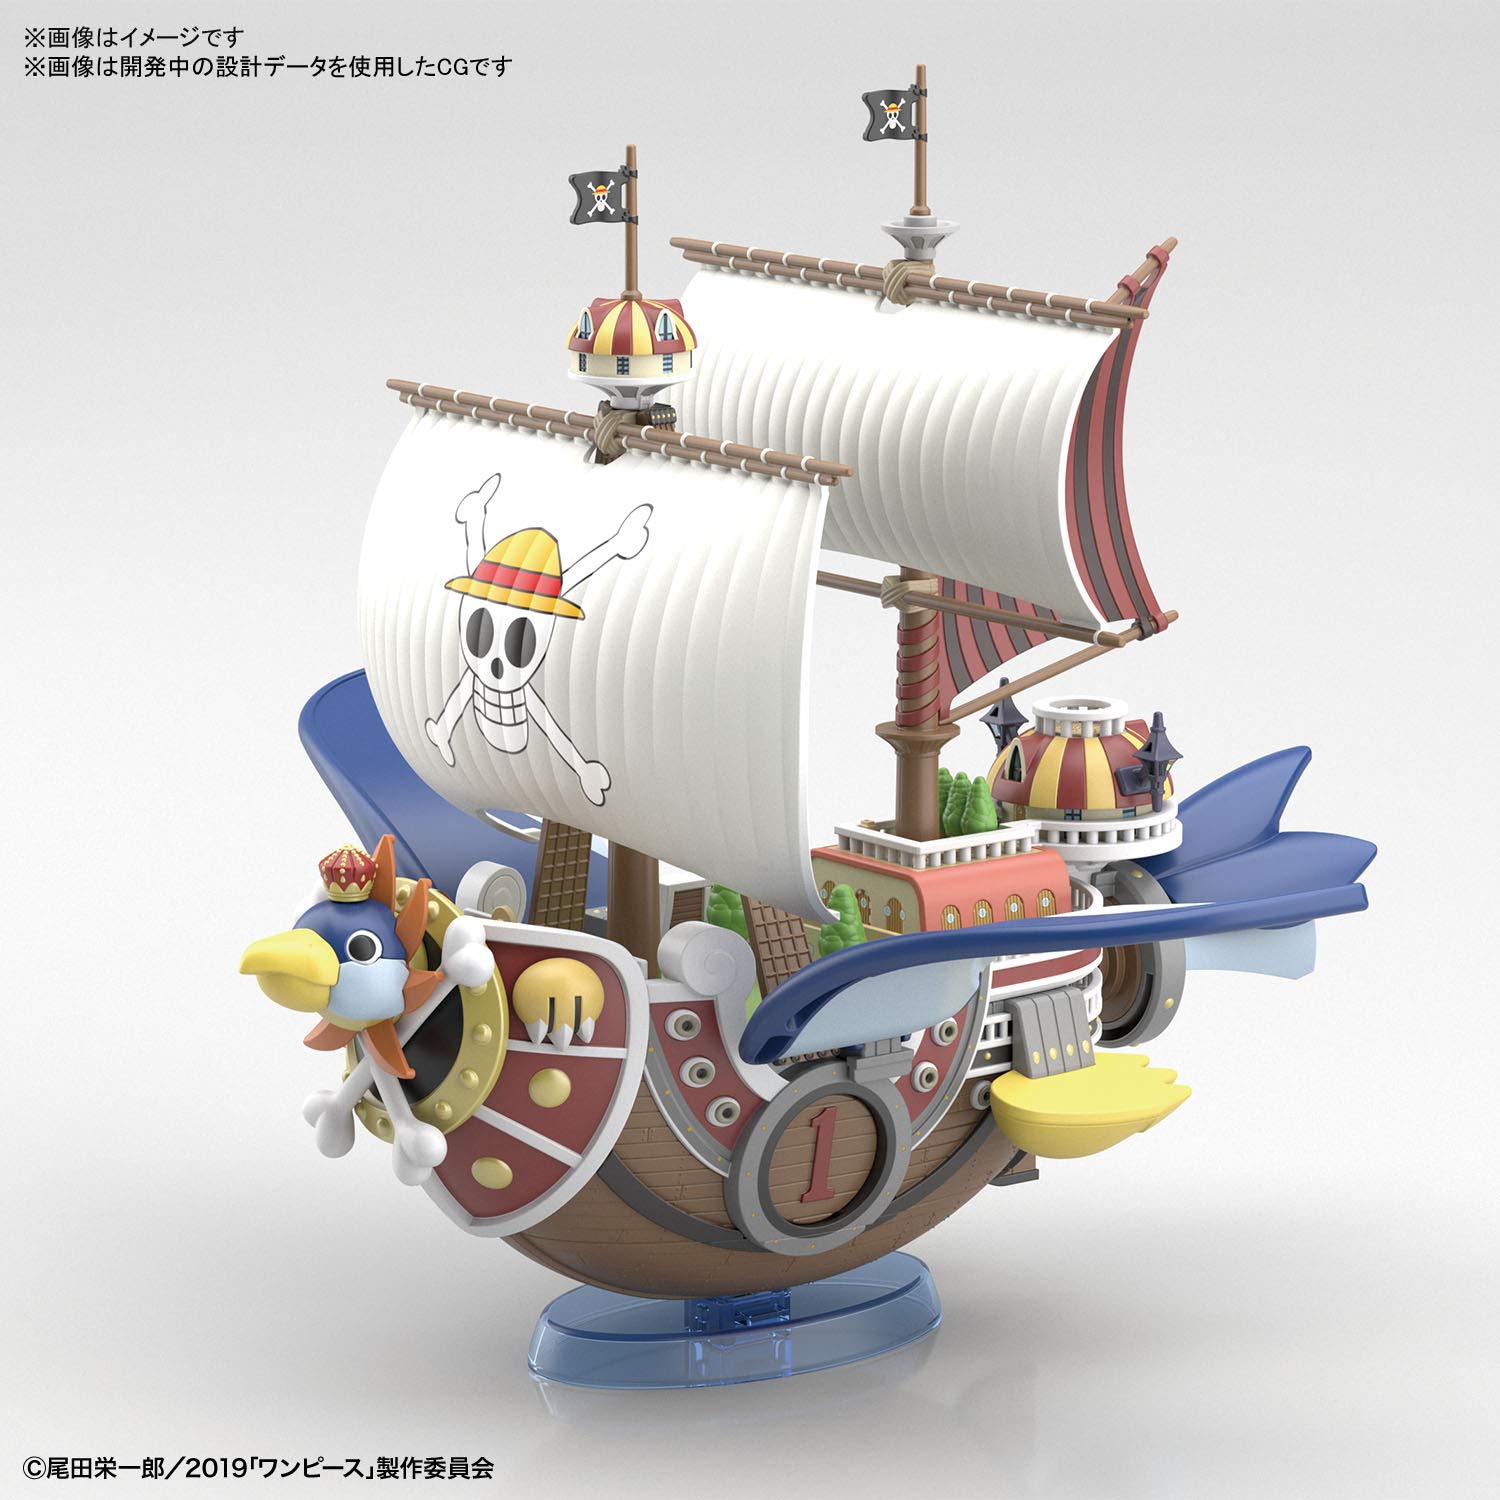 Bandai One Piece Grand Ship Collection #15 Thousand Sunny (Stampede) Flying Model Kit